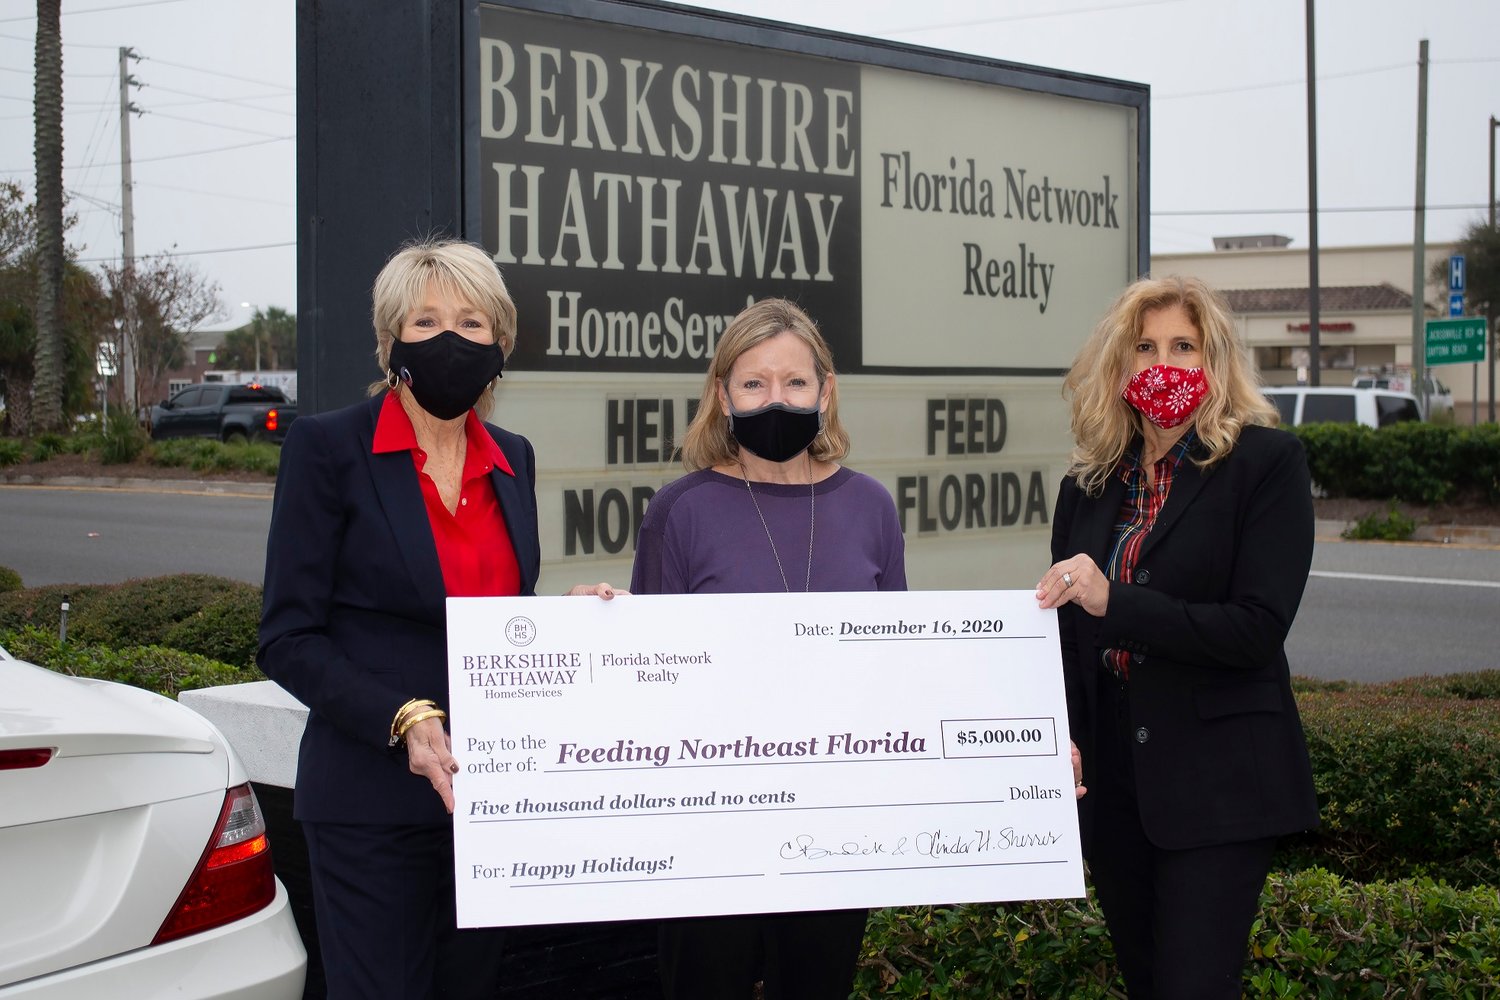 Berkshire Hathaway HomeServices FNR presents a $5,000 donation to Feeding Northeast Florida. From left: Linda Sherrer, Berkshire Hathaway HomeServices Florida Network Realty founder and chairman; Susan King, president and CEO of Feeding Northeast Florida; Ann King, Berkshire Hathaway HomeServices Florida Network Realty vice president of brokerage.